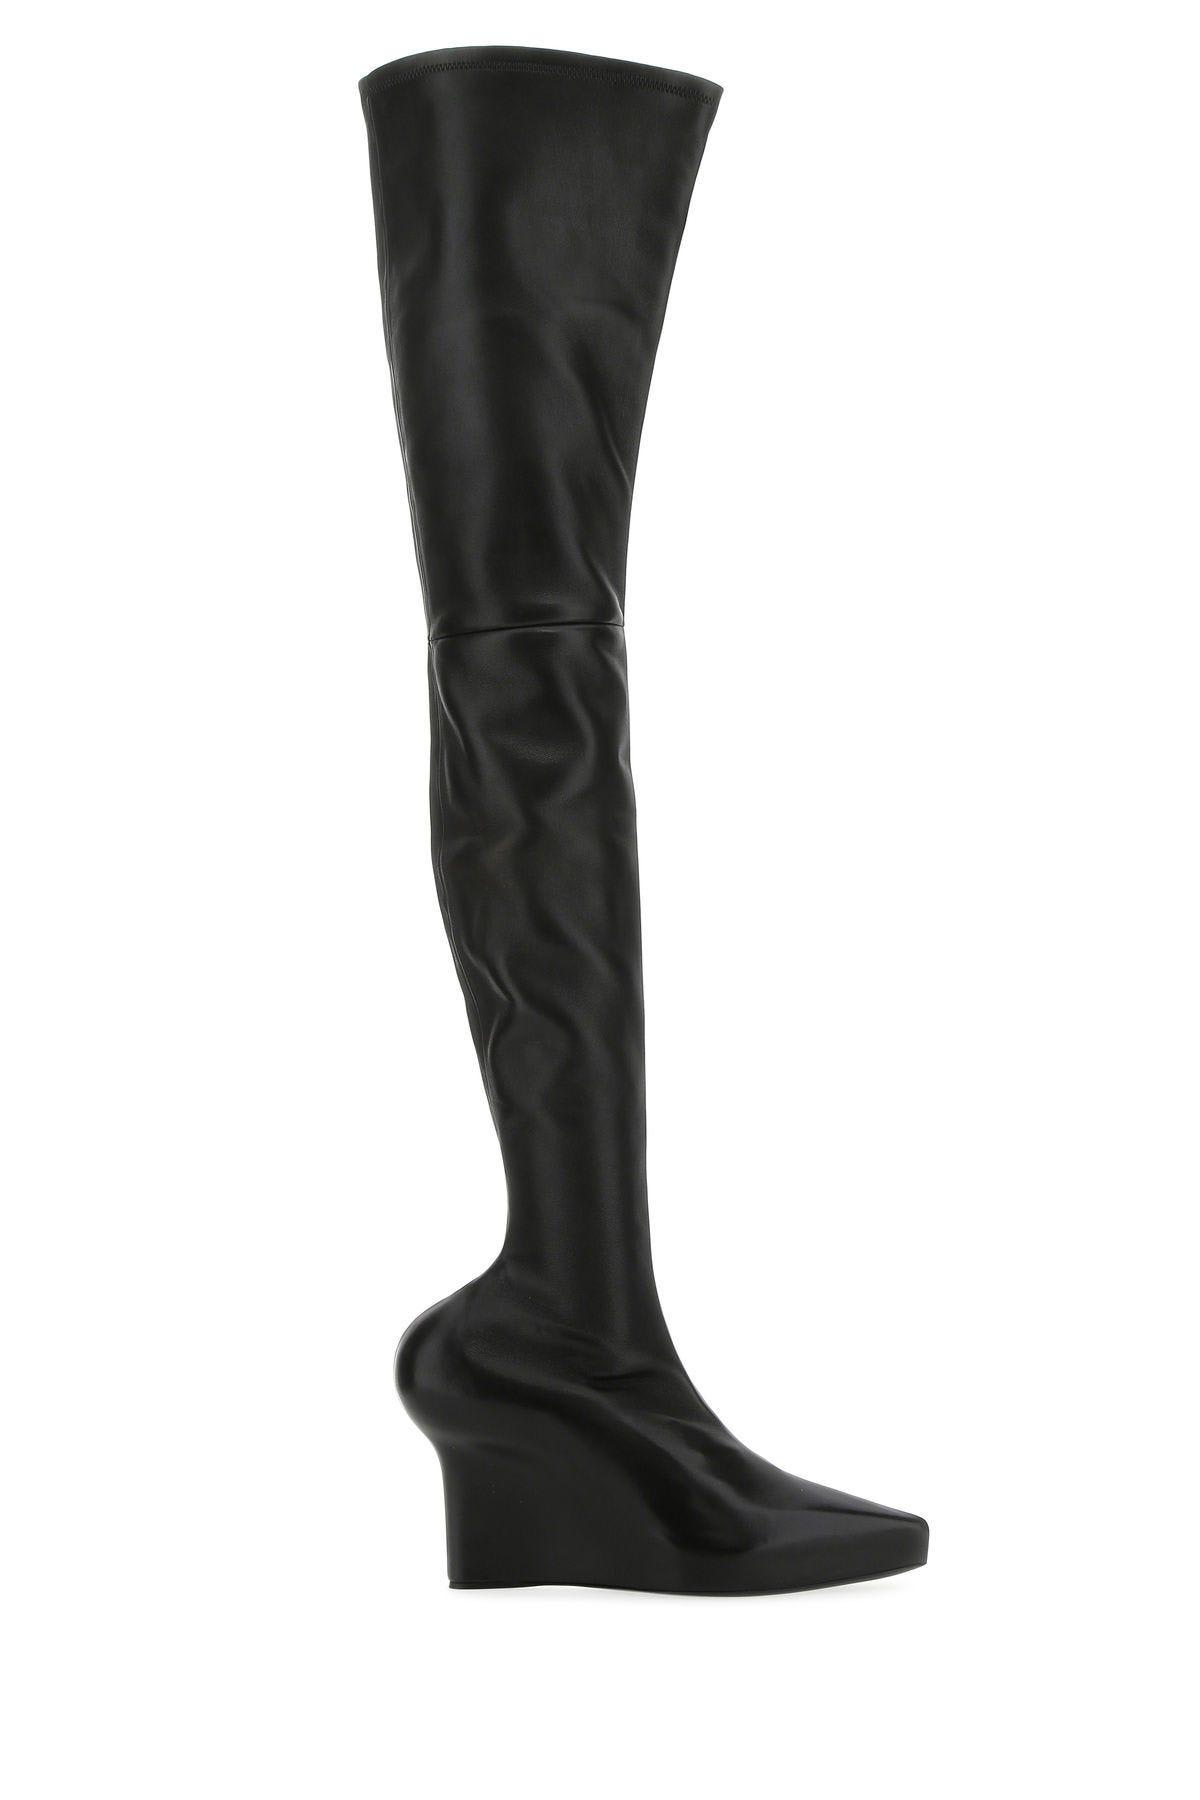 Shop Givenchy Black Nappa Leather Show Boots